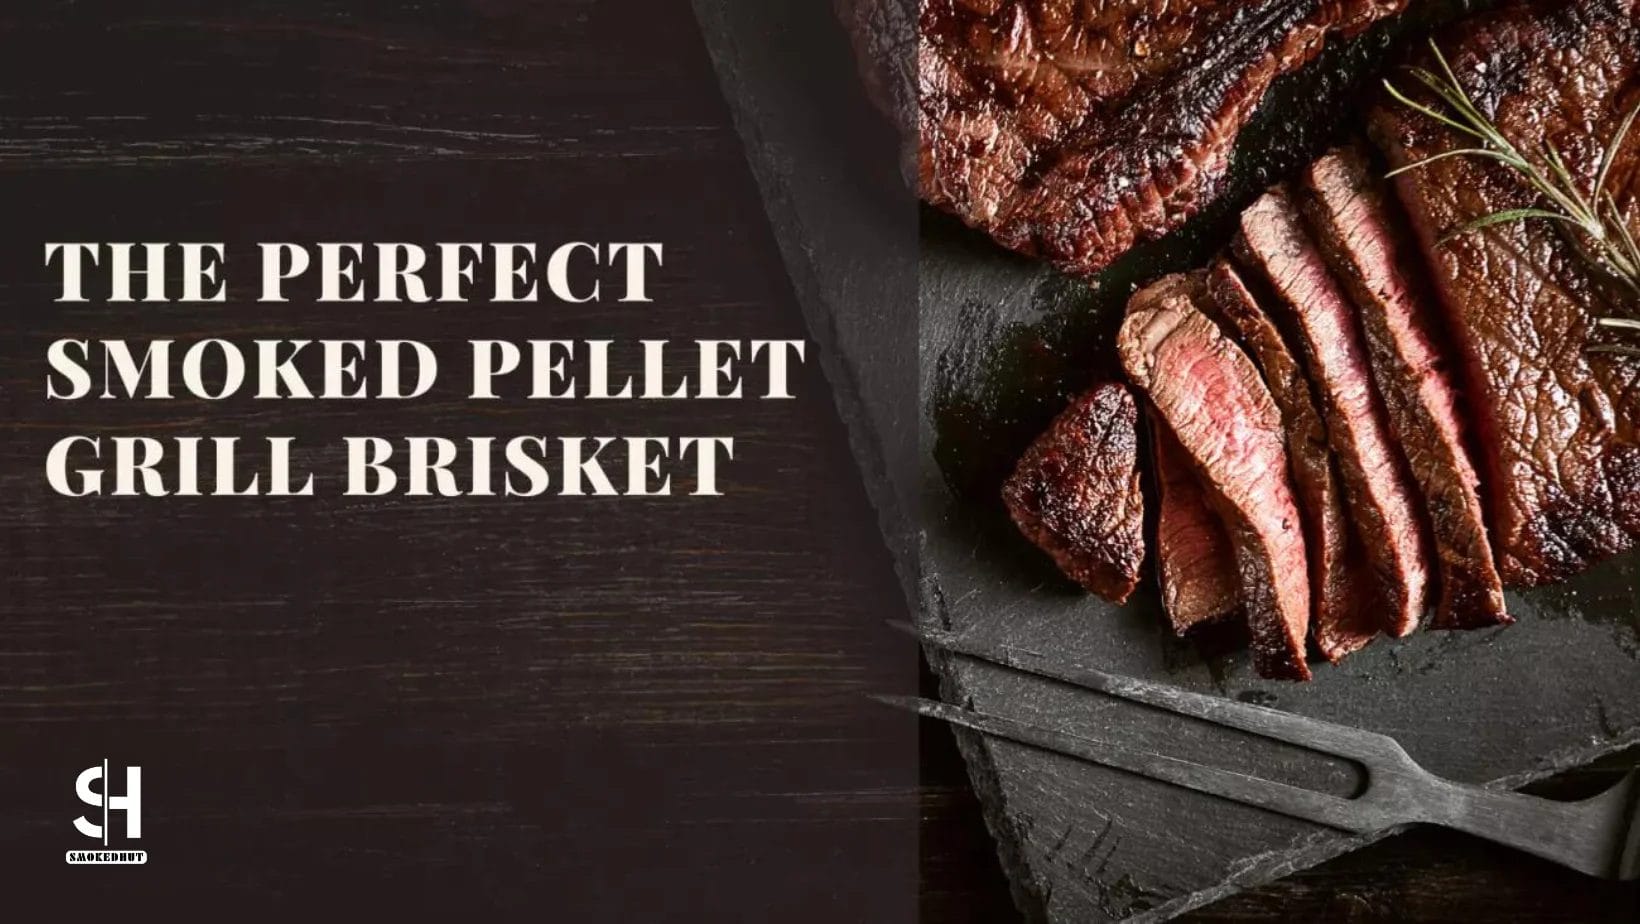 The Perfect Smoked Pellet Grill Brisket